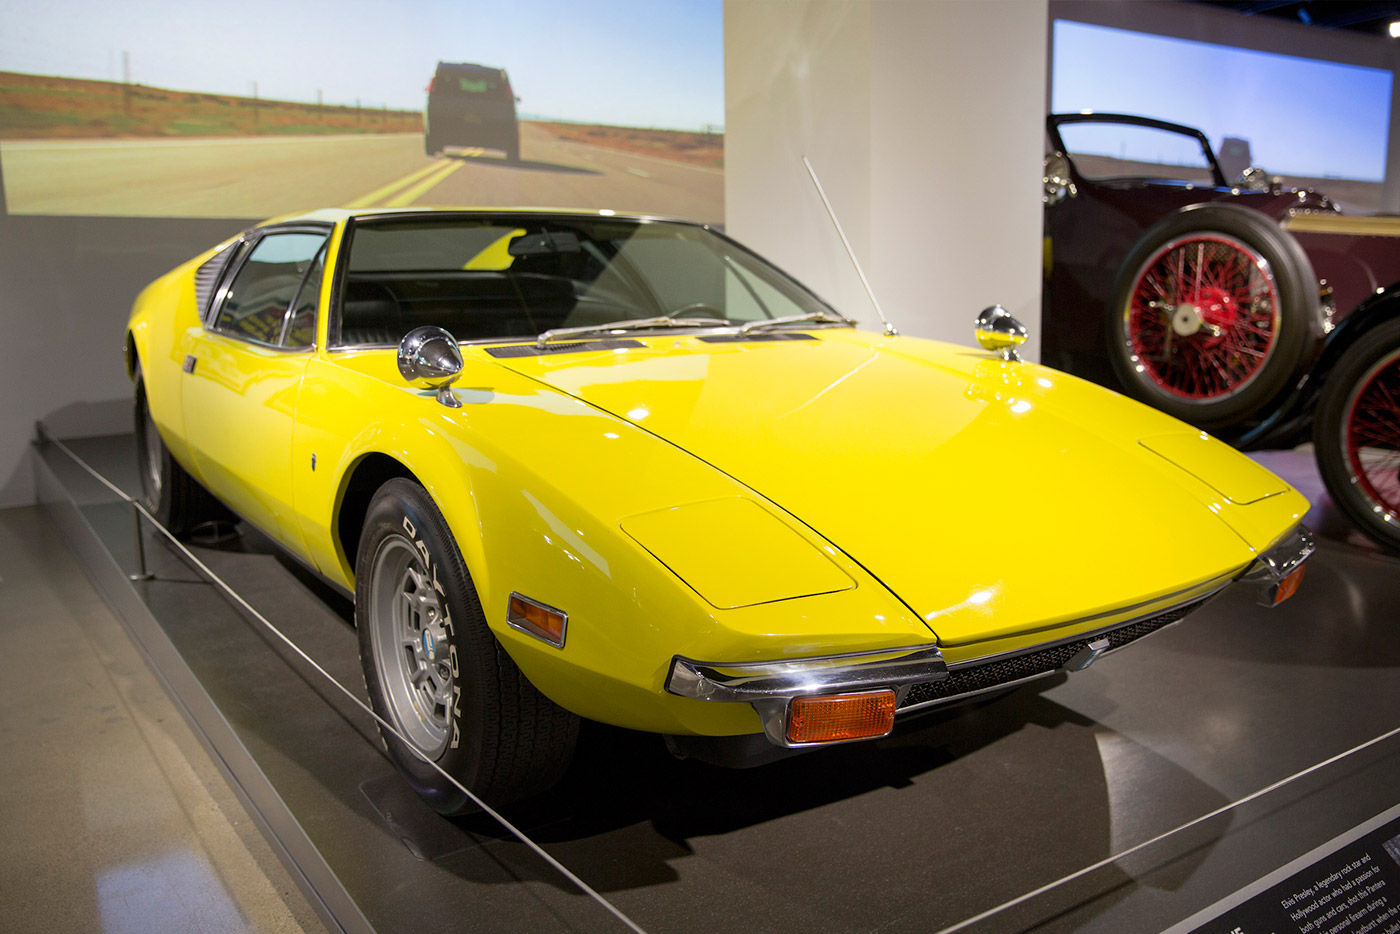 1971 De Tomaso Pantera: This Italian-American exotic belonged to Elvis Presley, who once hopped in the driver&#x2019;s seat hoping to peel out in a dramatic exit. Instead, the engine stalled, Elvis took out his revolver, and shot the car three times